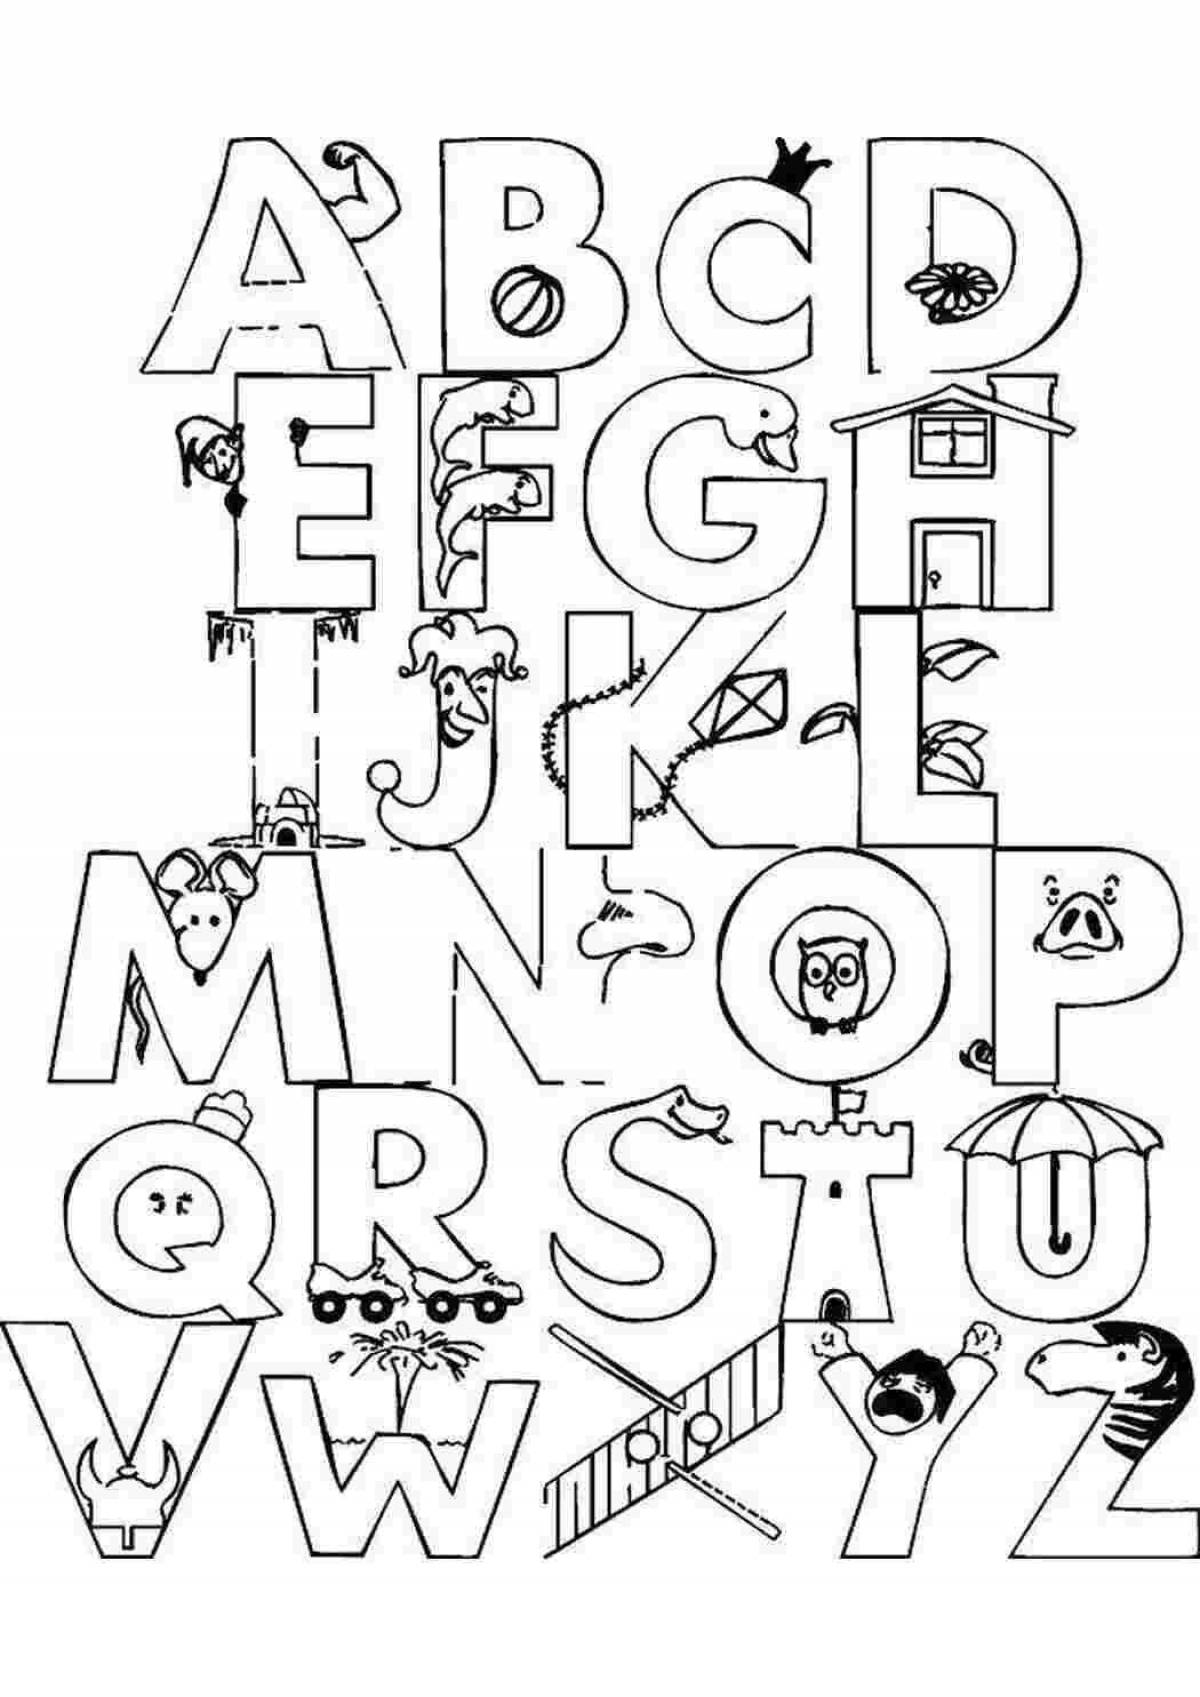 Colorful english letters coloring page for little explorers